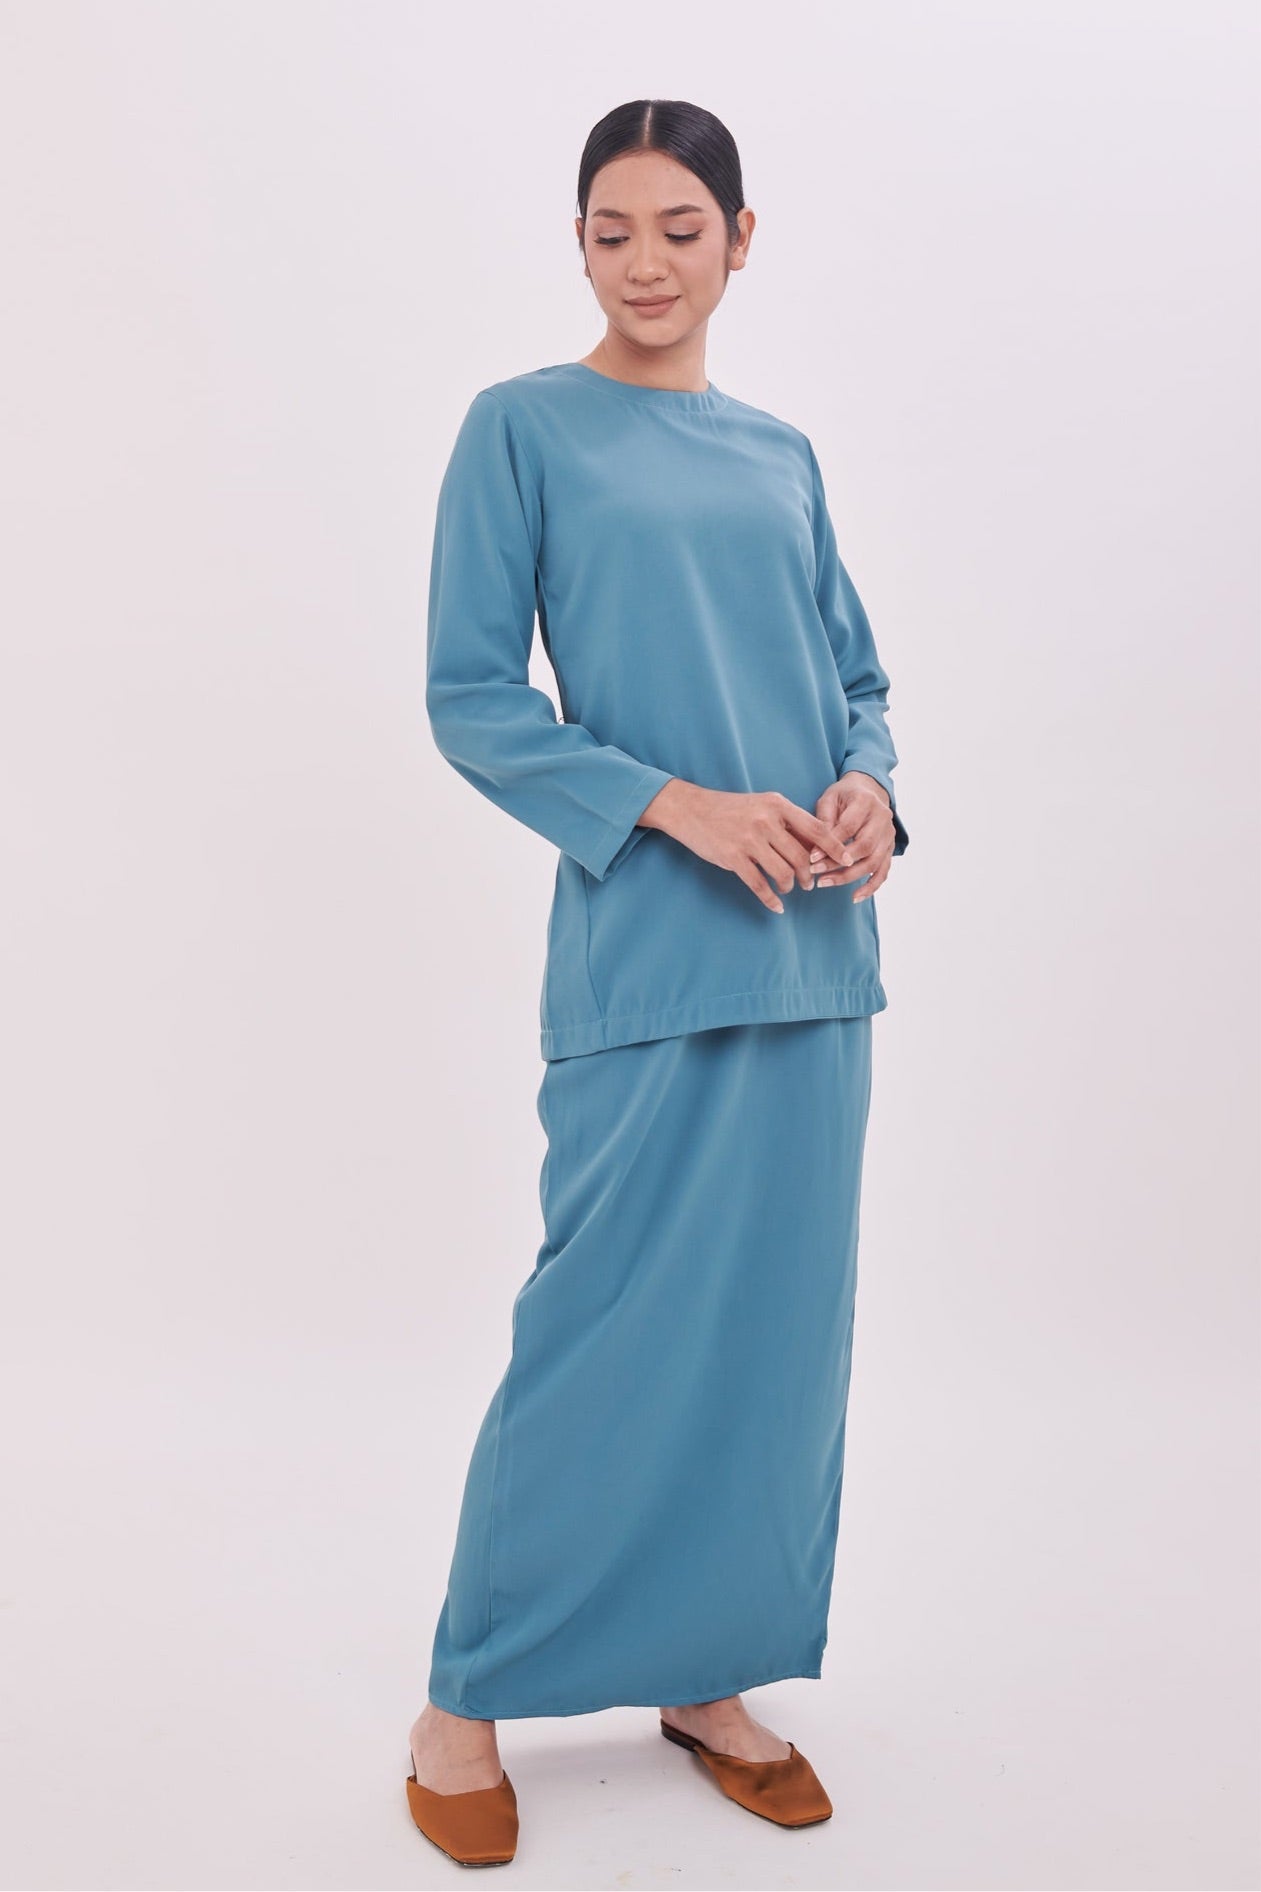 Edza Blouse in Turquoise